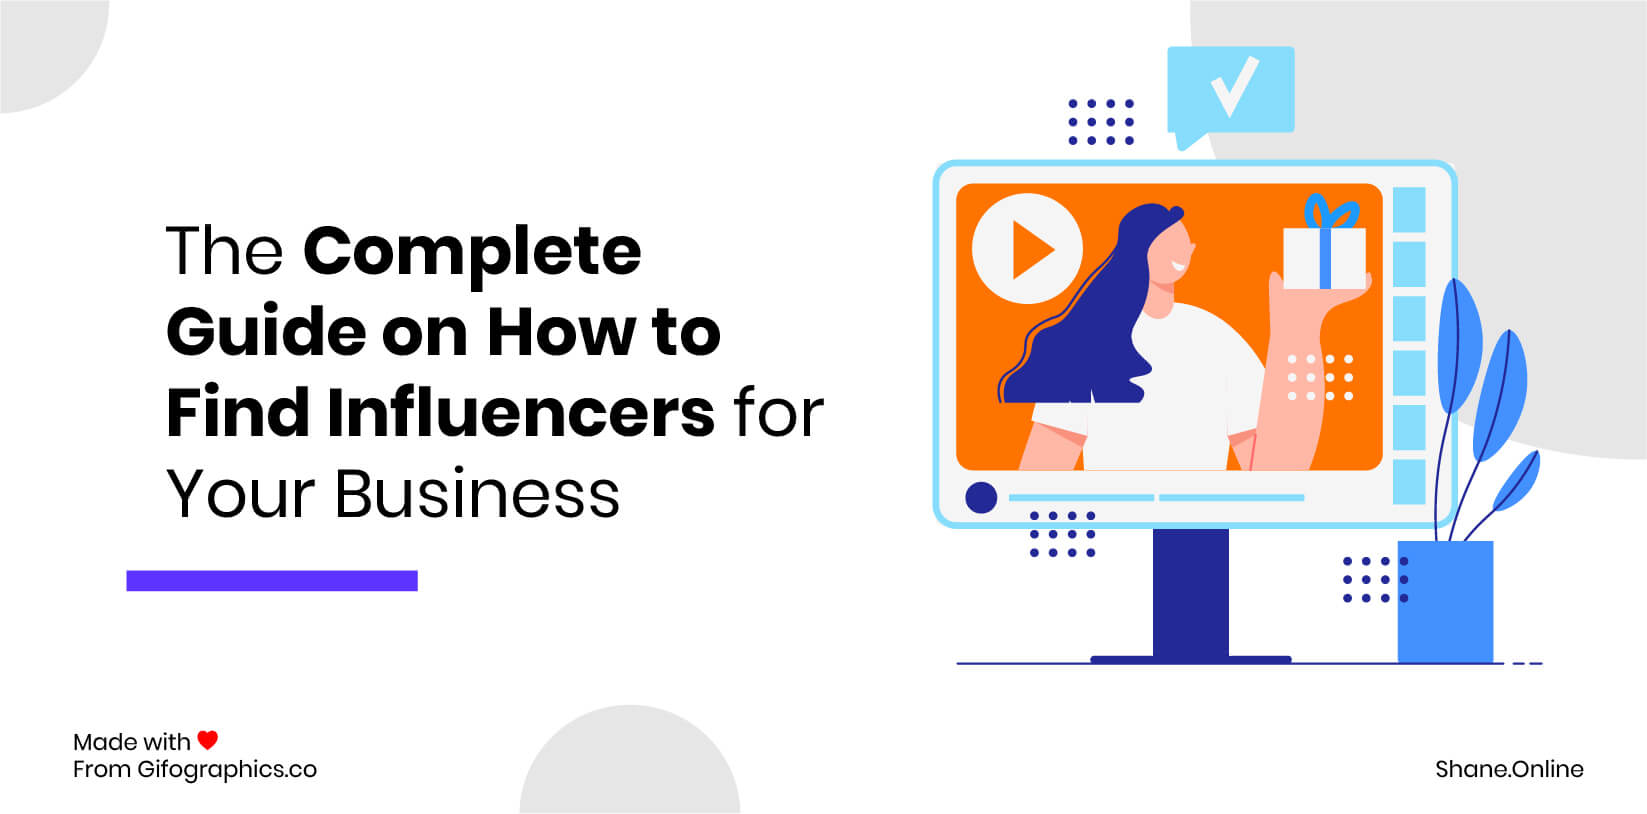 The Complete Guide on How to Find Influencers for Your Brand in 2022